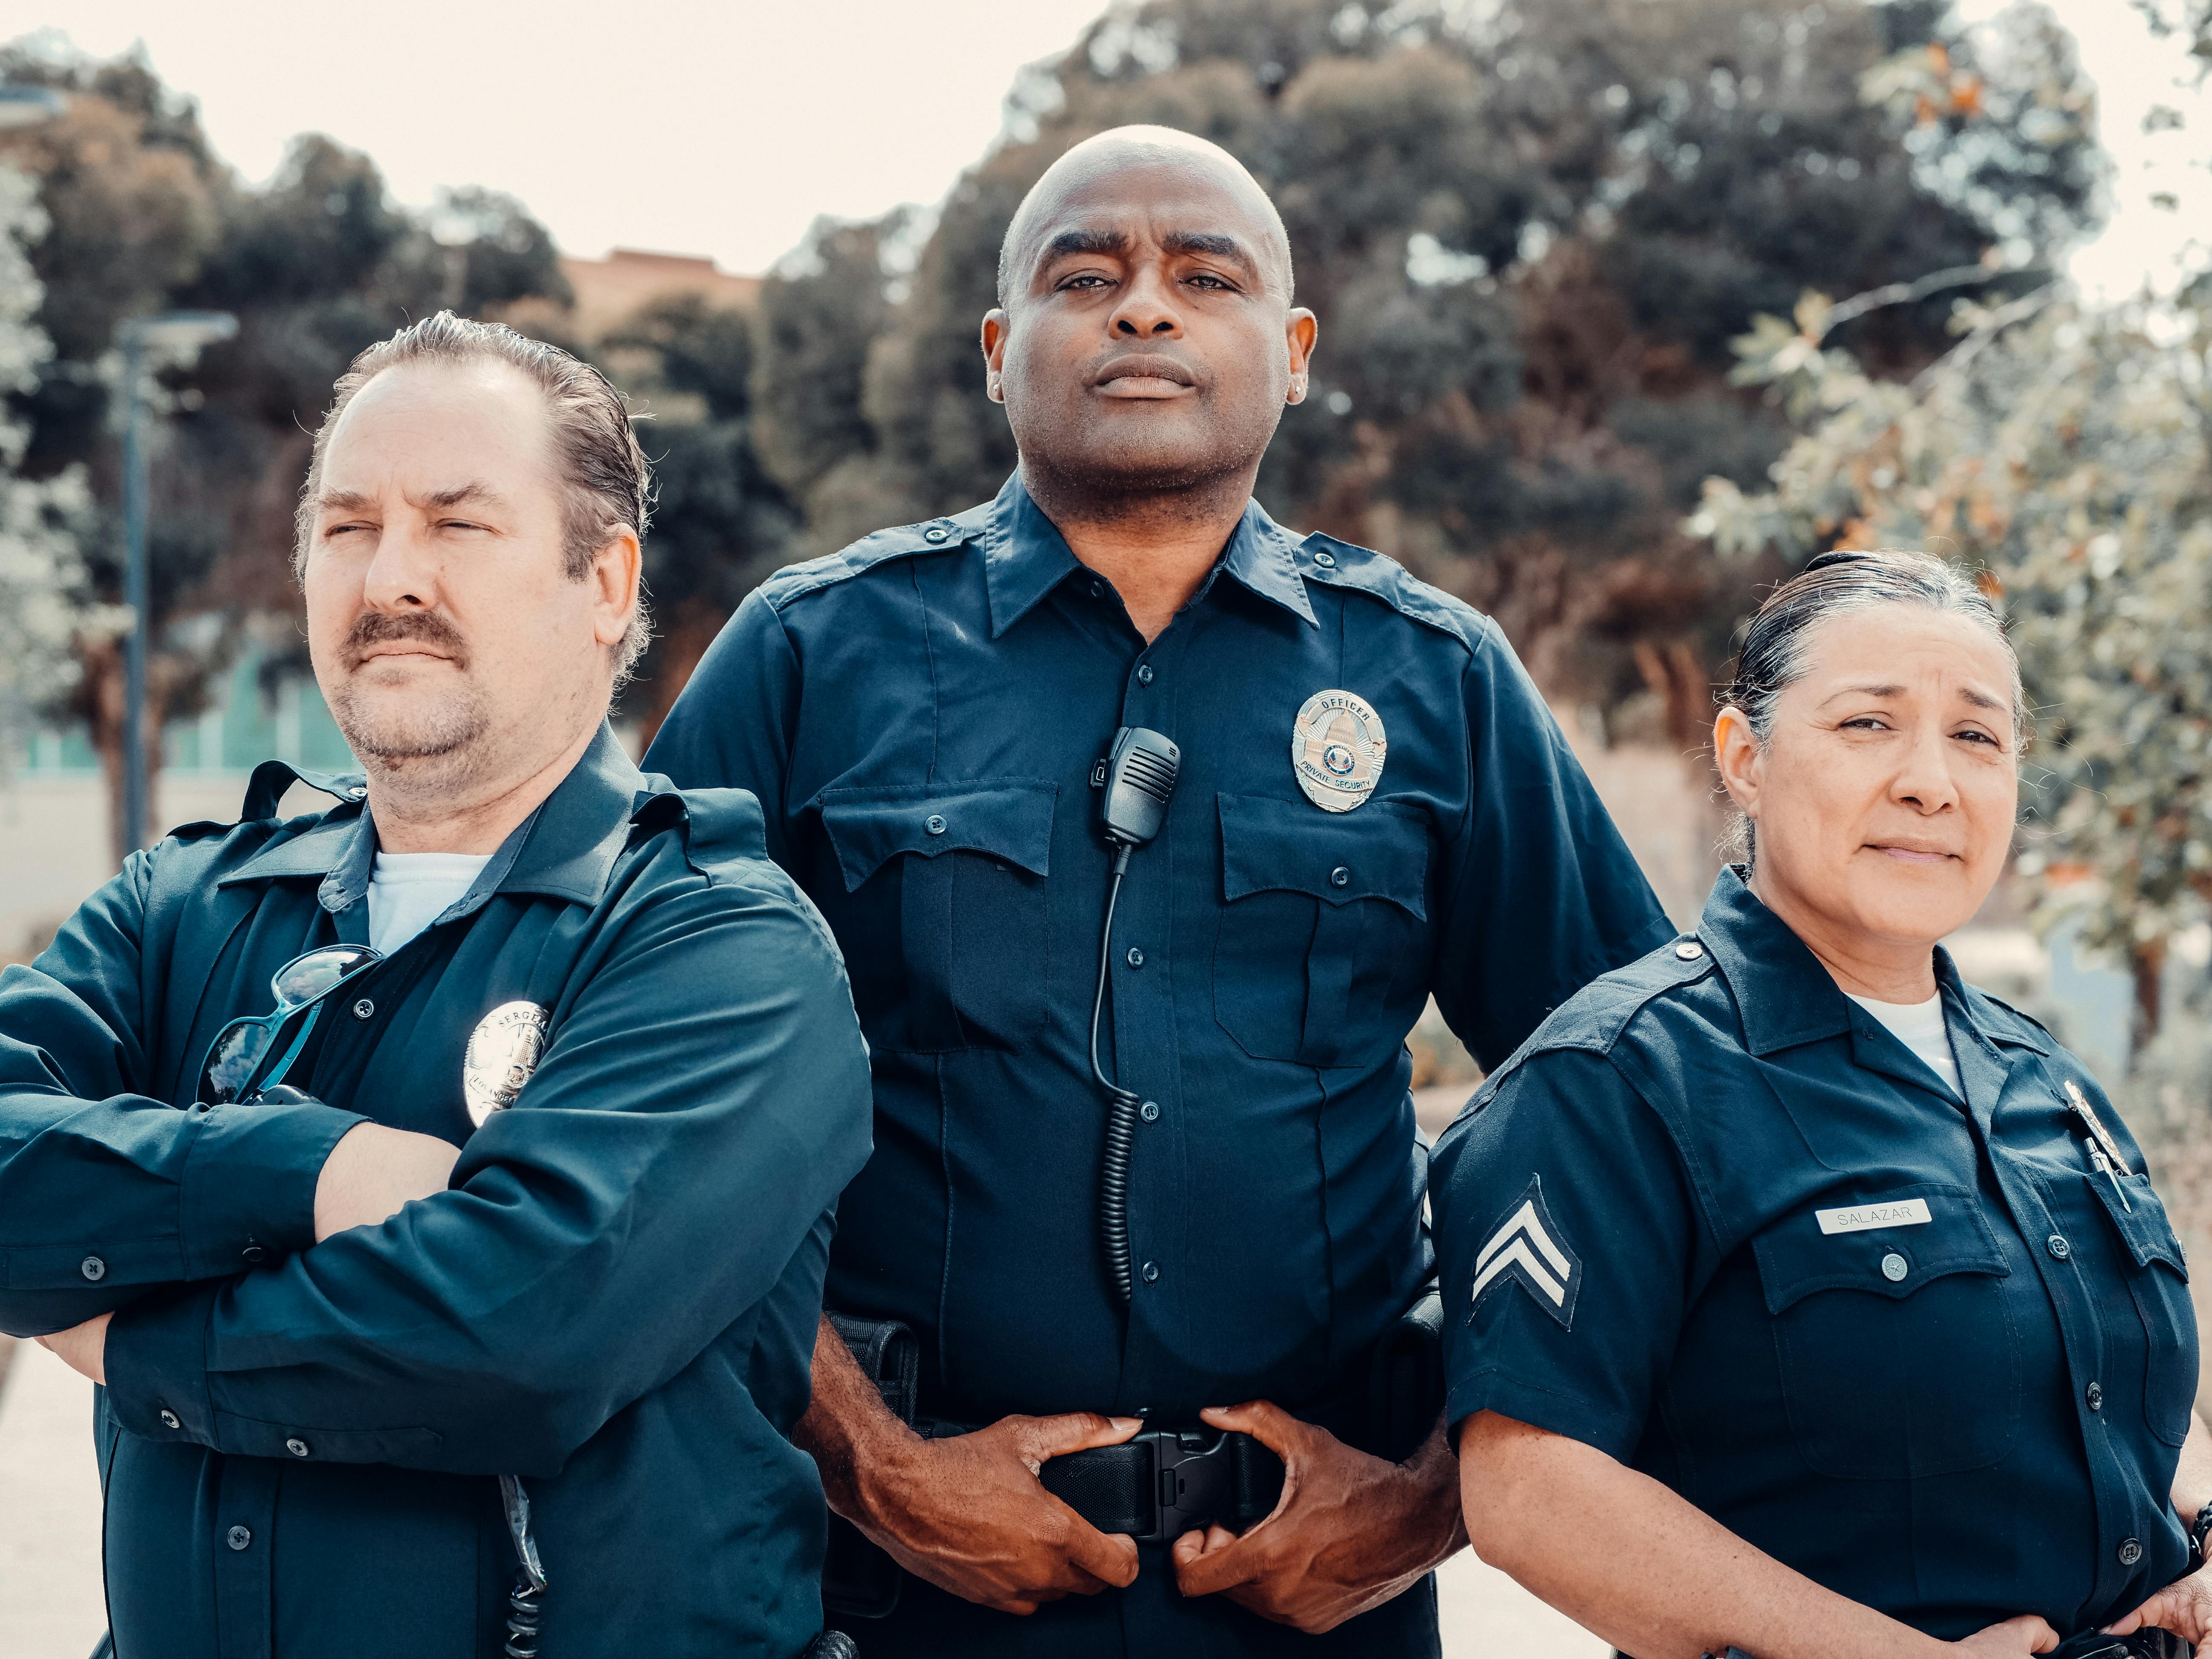 Some police officers standing together | Source: Pexels